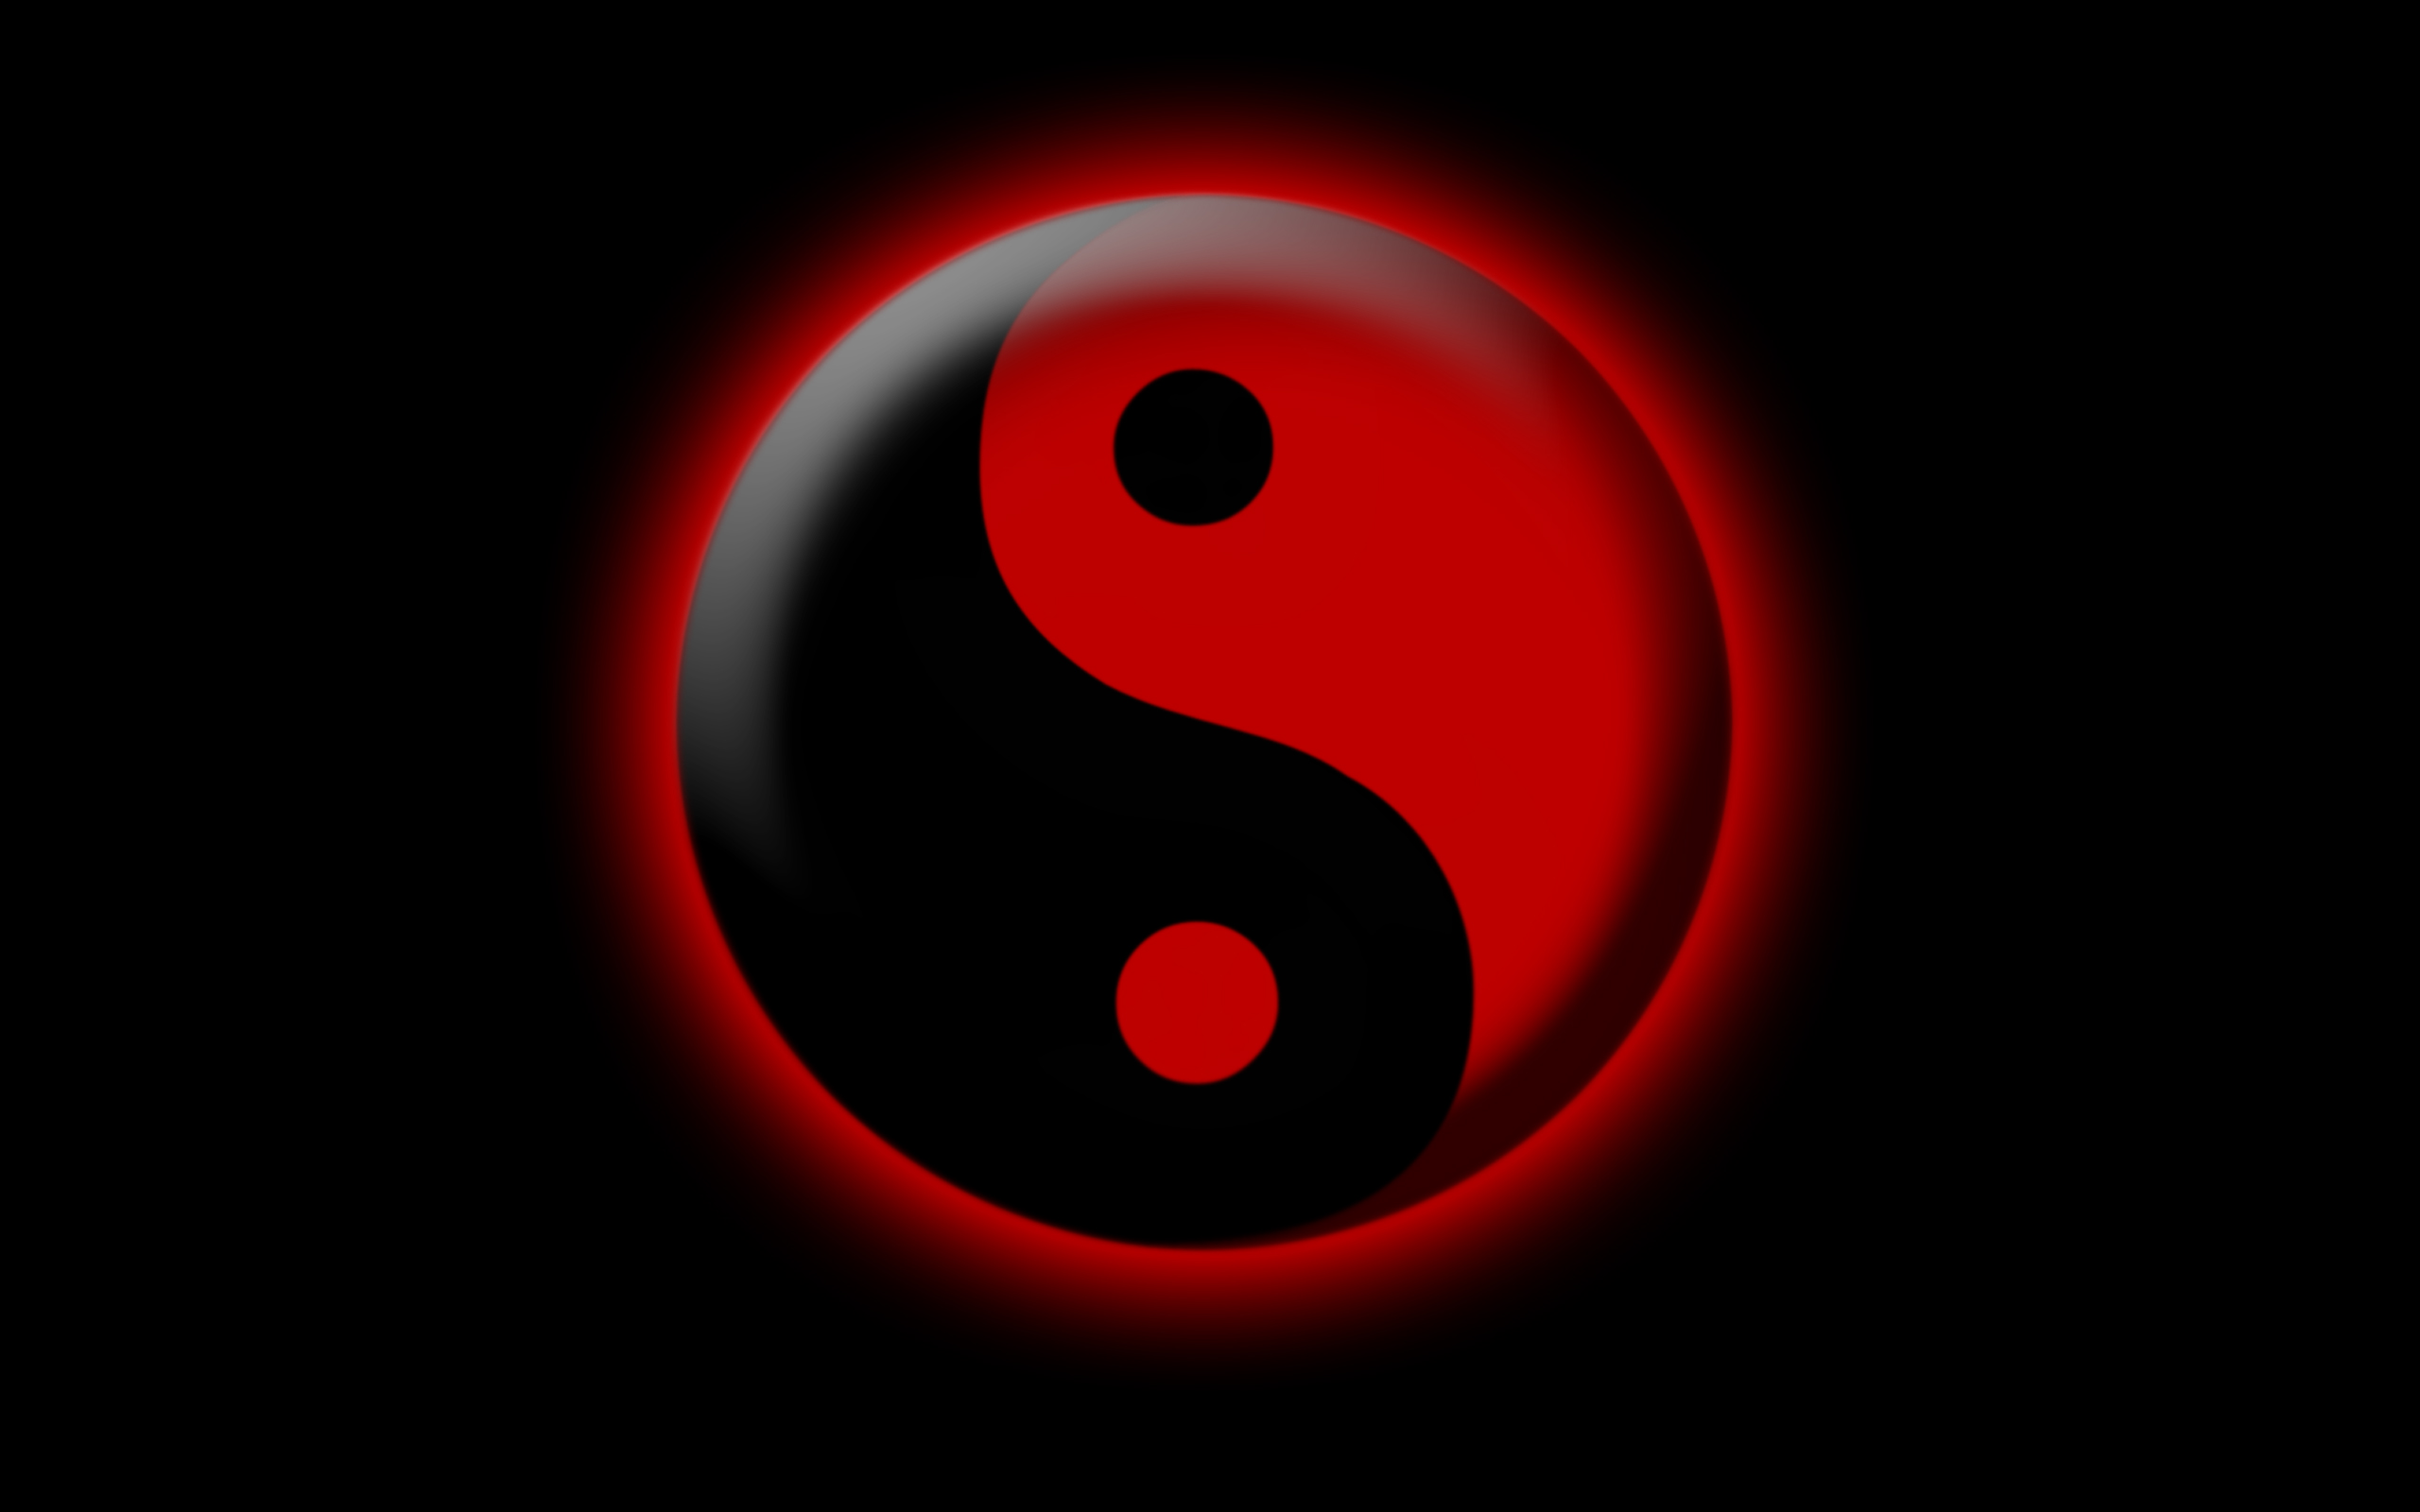 Ying Yang Wallpaper 74 pictures